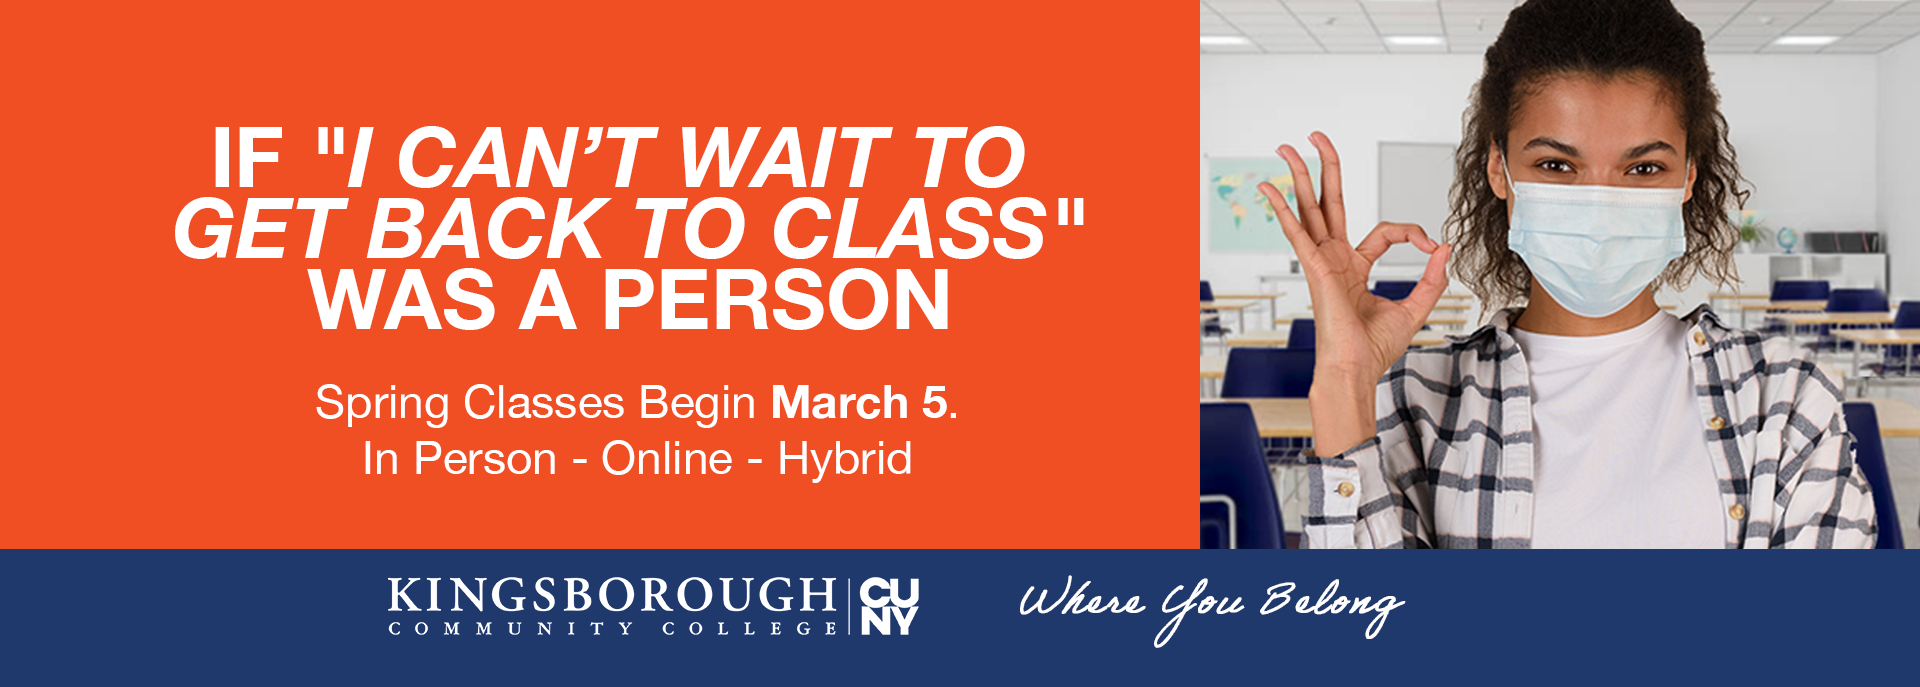 Check The Class Format: In-Person, Online and Hybrid